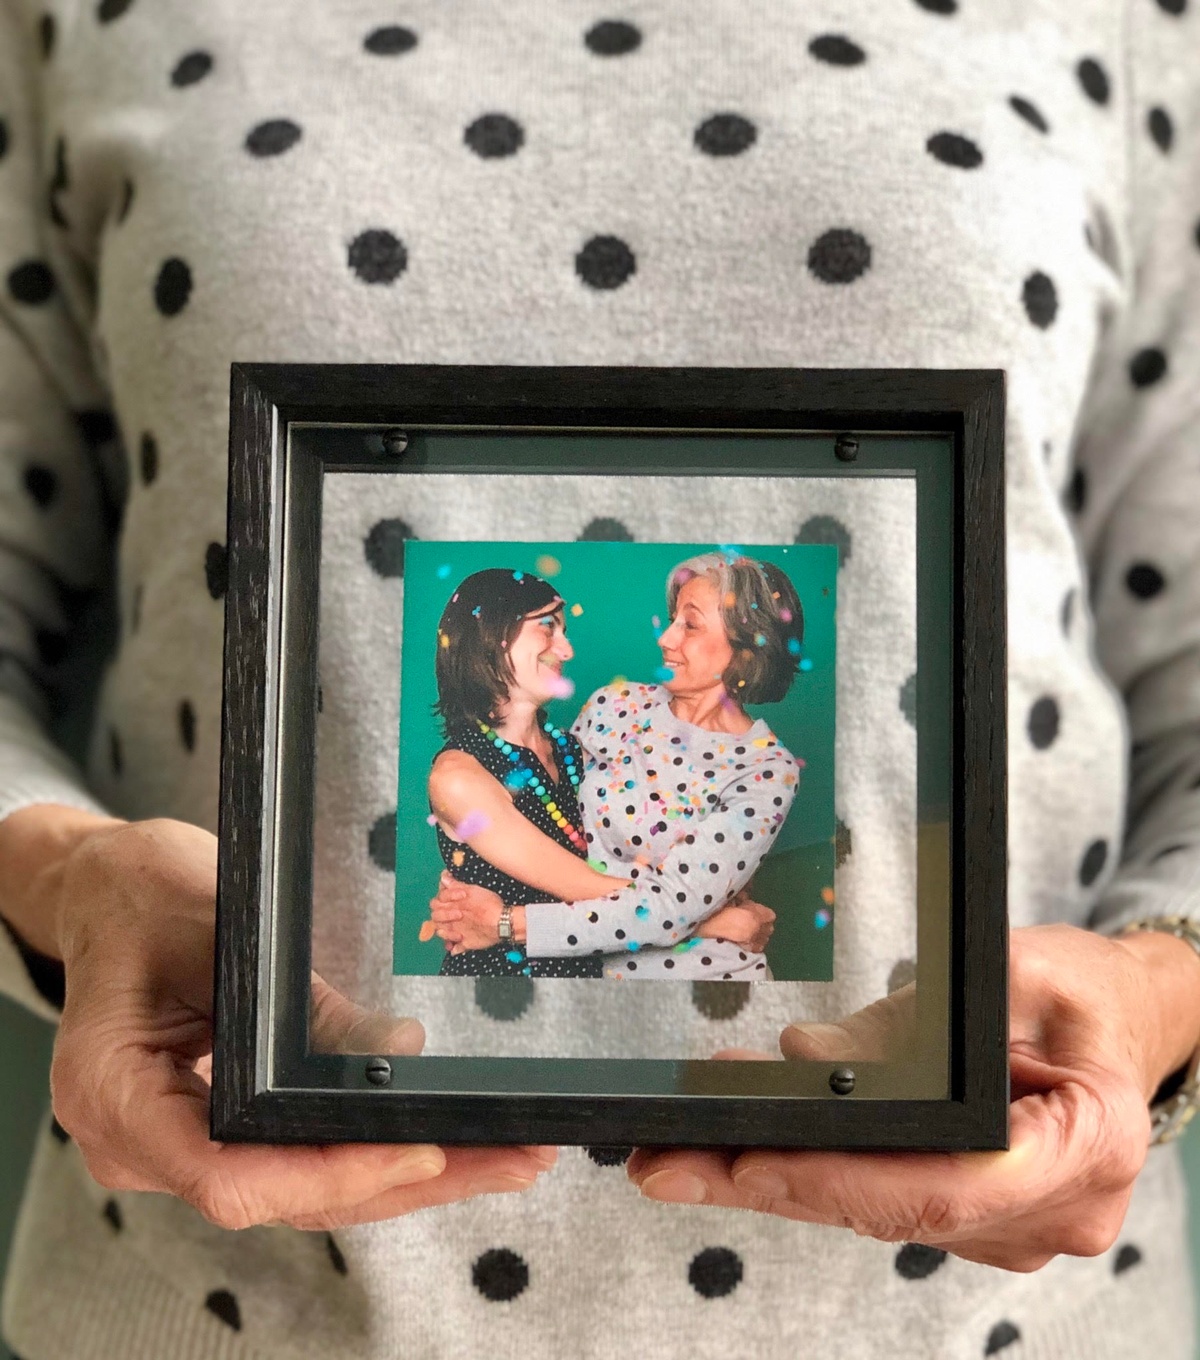 Small photo of two women being held by two hands in black frame